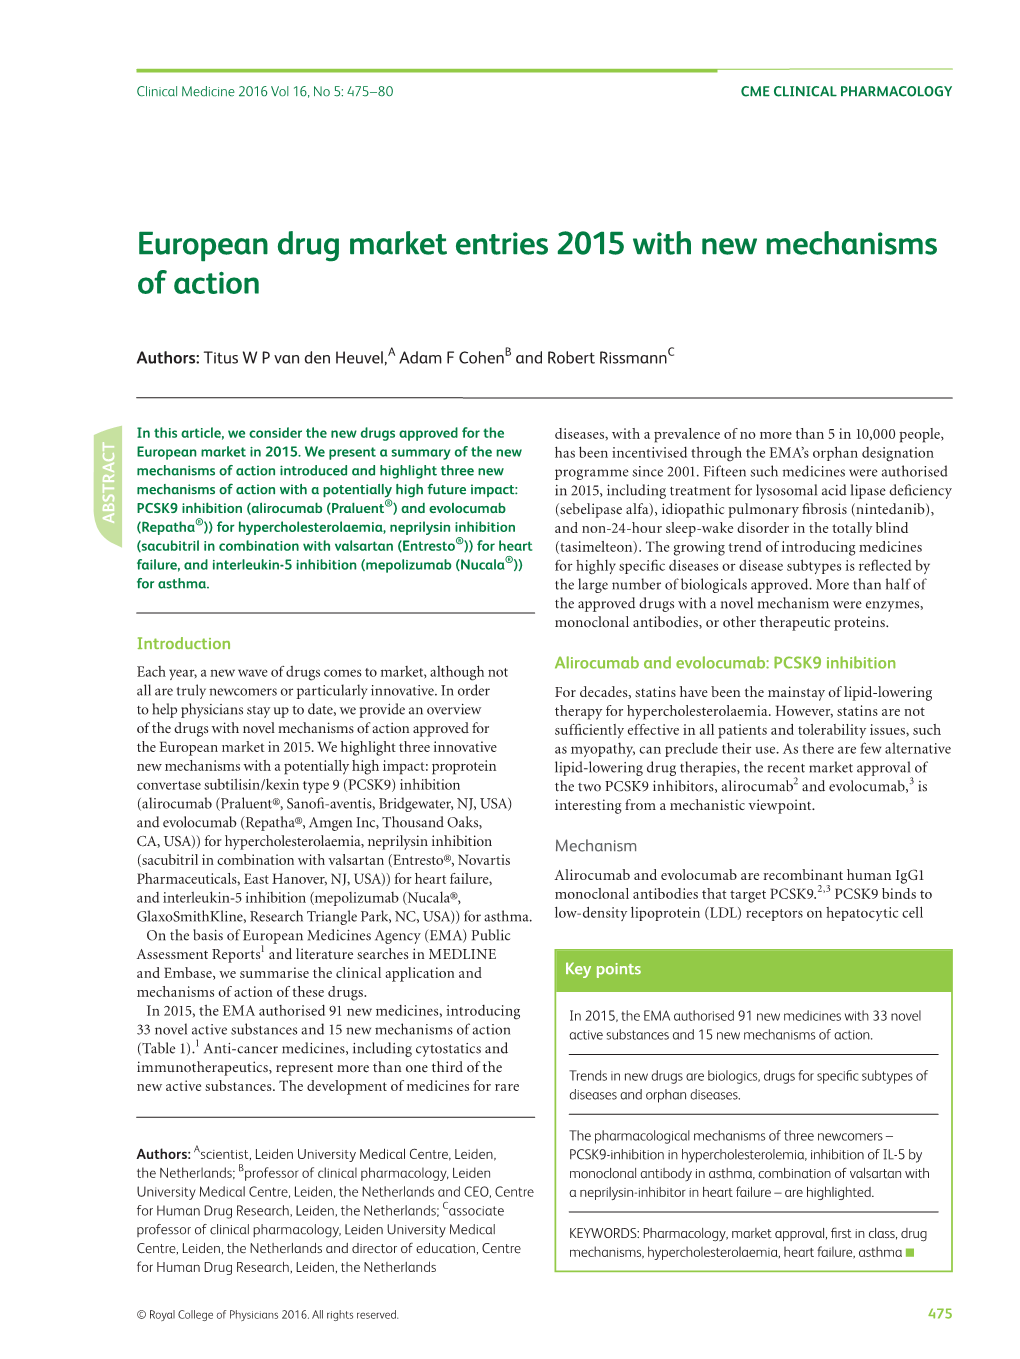 European Drug Market Entries 2015 with New Mechanisms of Action